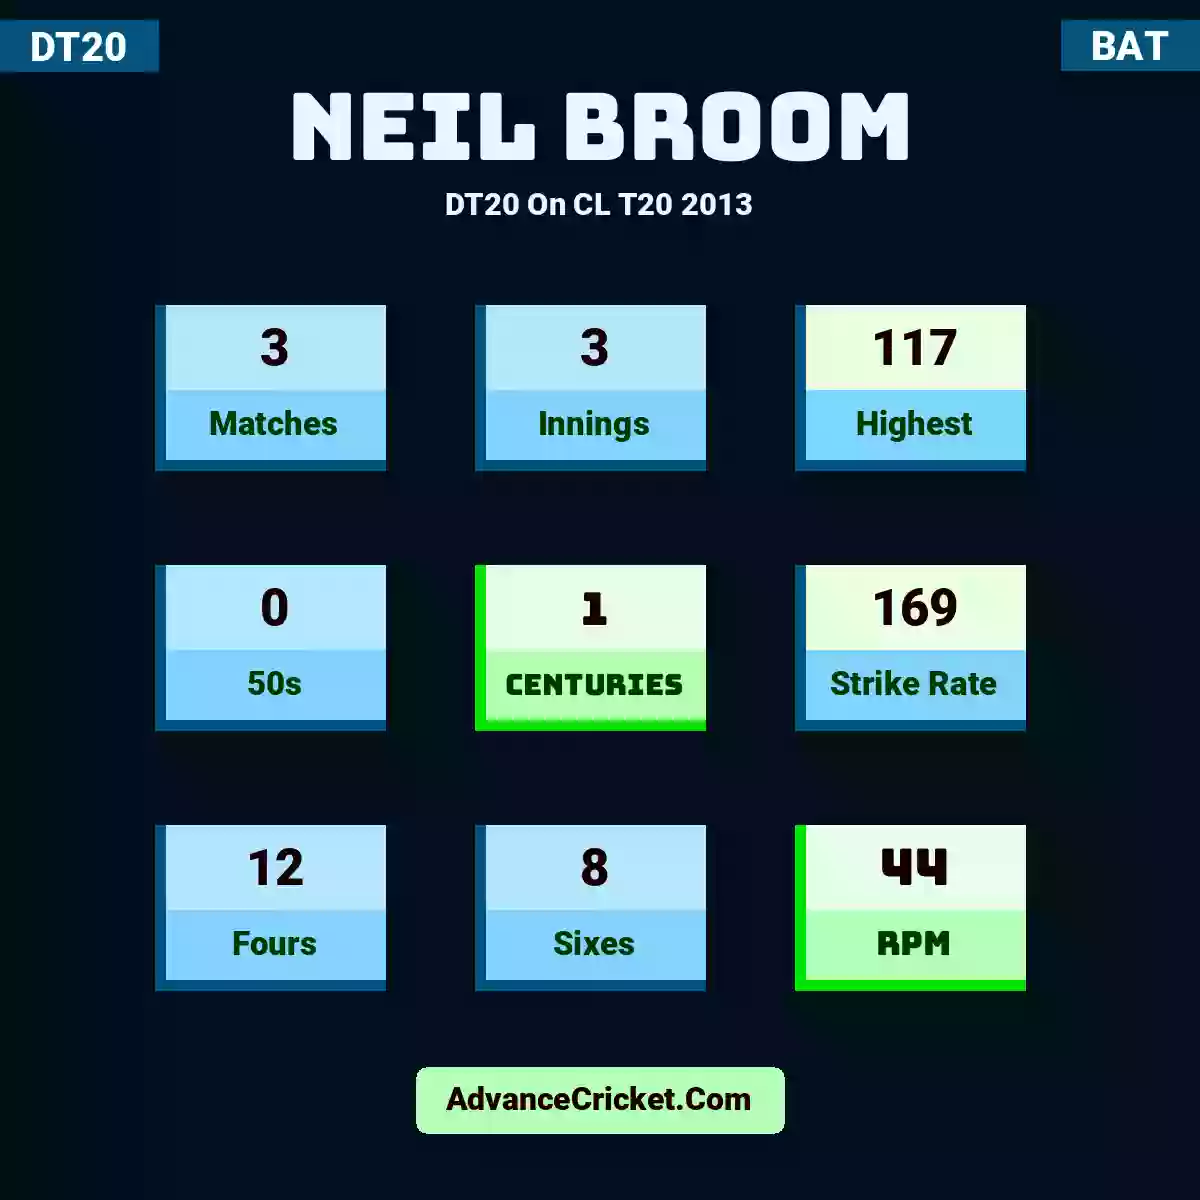 Neil Broom DT20  On CL T20 2013, Neil Broom played 3 matches, scored 117 runs as highest, 0 half-centuries, and 1 centuries, with a strike rate of 169. N.Broom hit 12 fours and 8 sixes, with an RPM of 44.